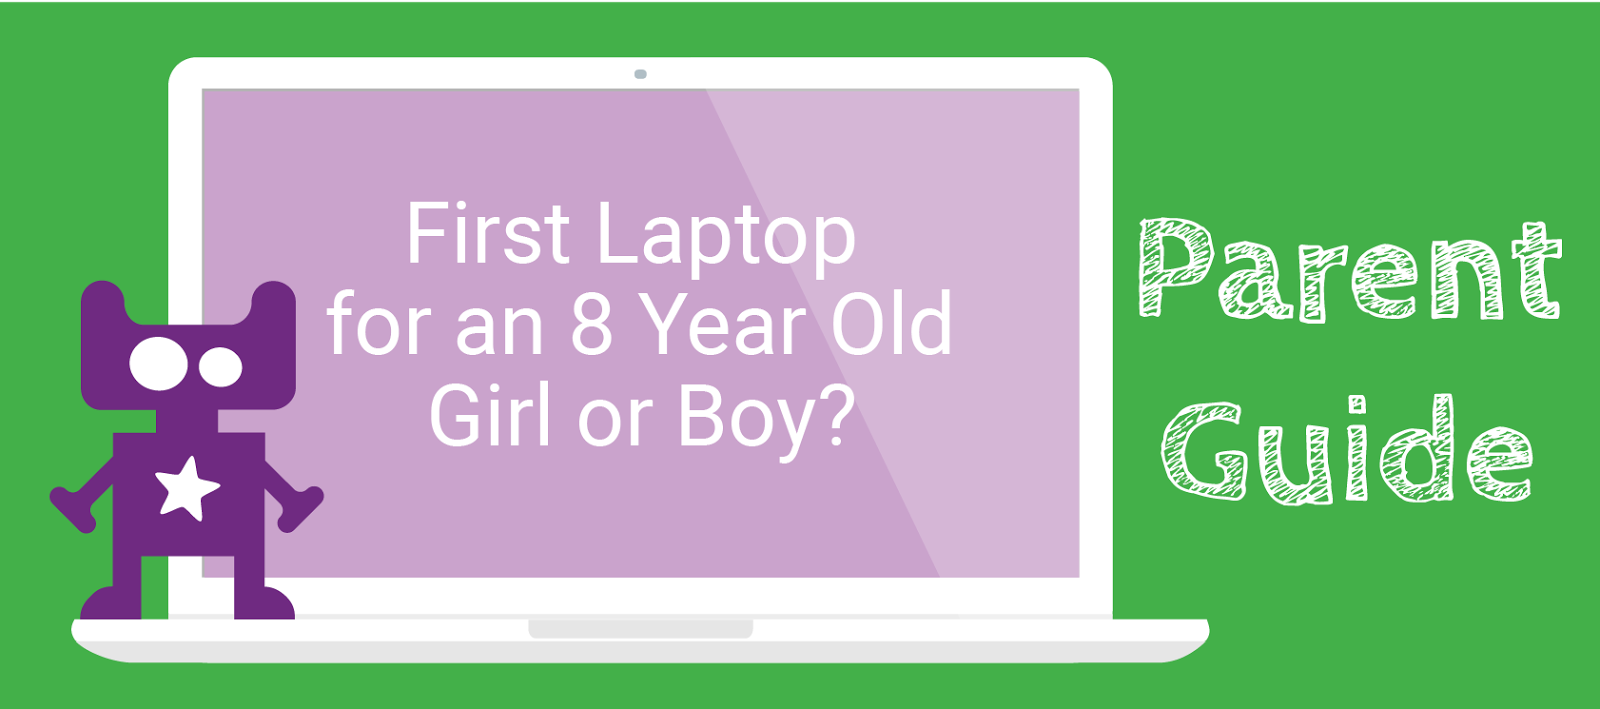 a-first-laptop-for-an-8-year-old-girl-or-boy-tech-age-kids-technology-for-children